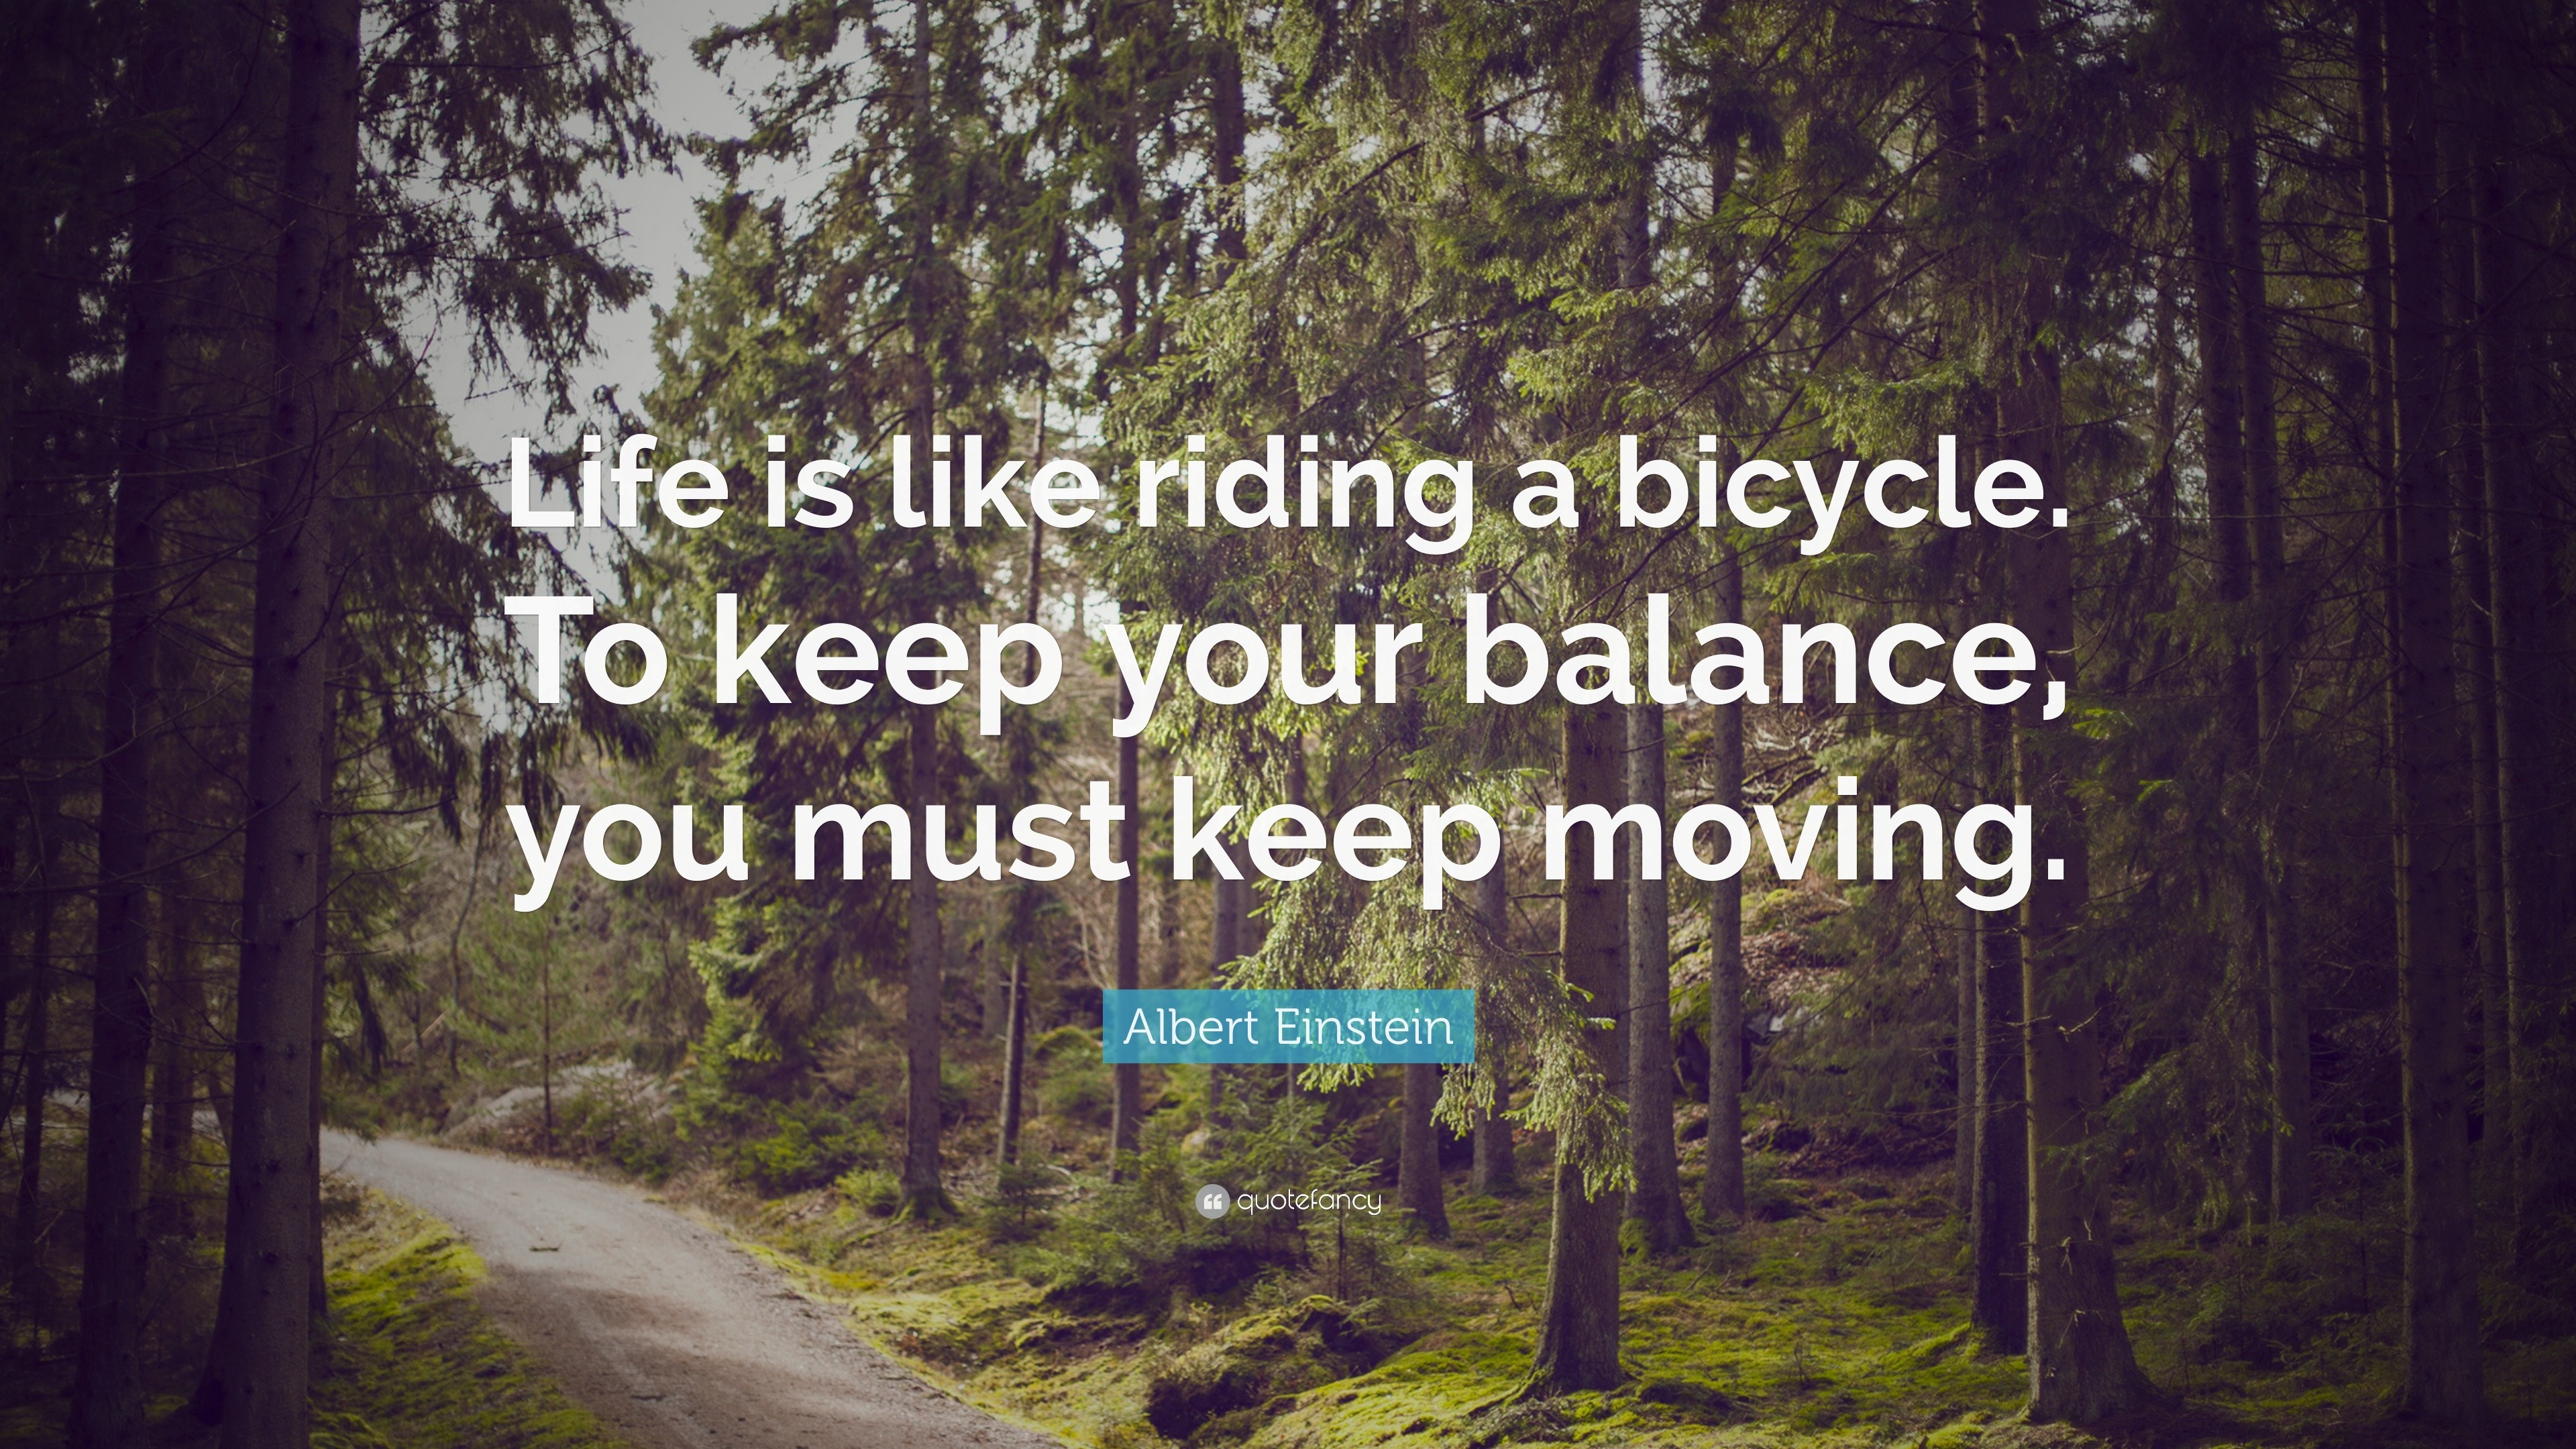 Albert Einstein Quote: "Life is like riding a bicycle. To keep your ... - 23431 Albert Einstein Quote Life Is Like RiDing A Bicycle To Keep Your